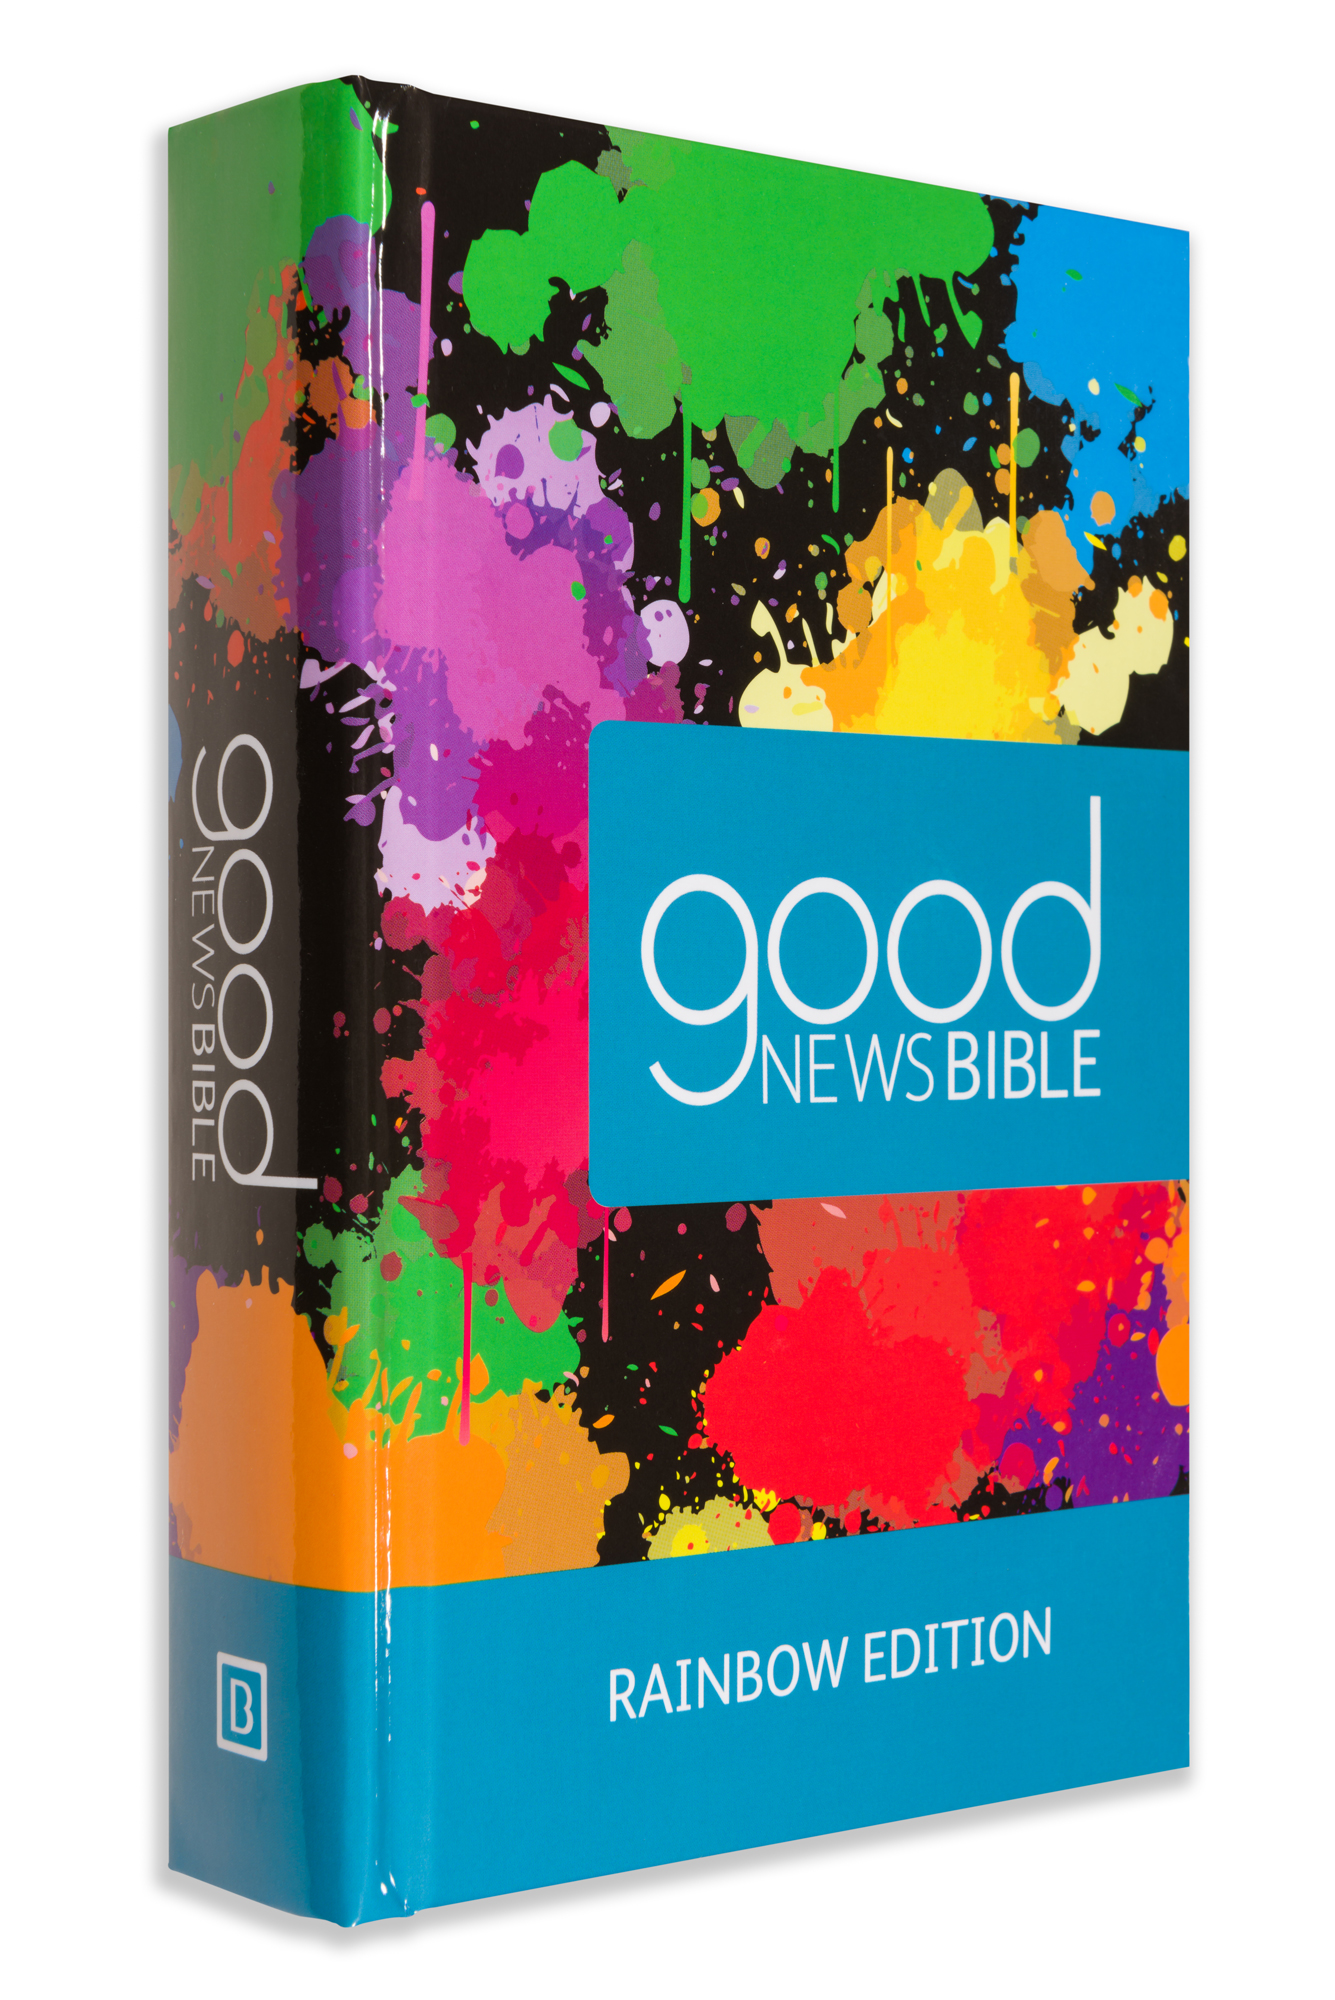 More information on GNB Good News Rainbow Bible New Edition